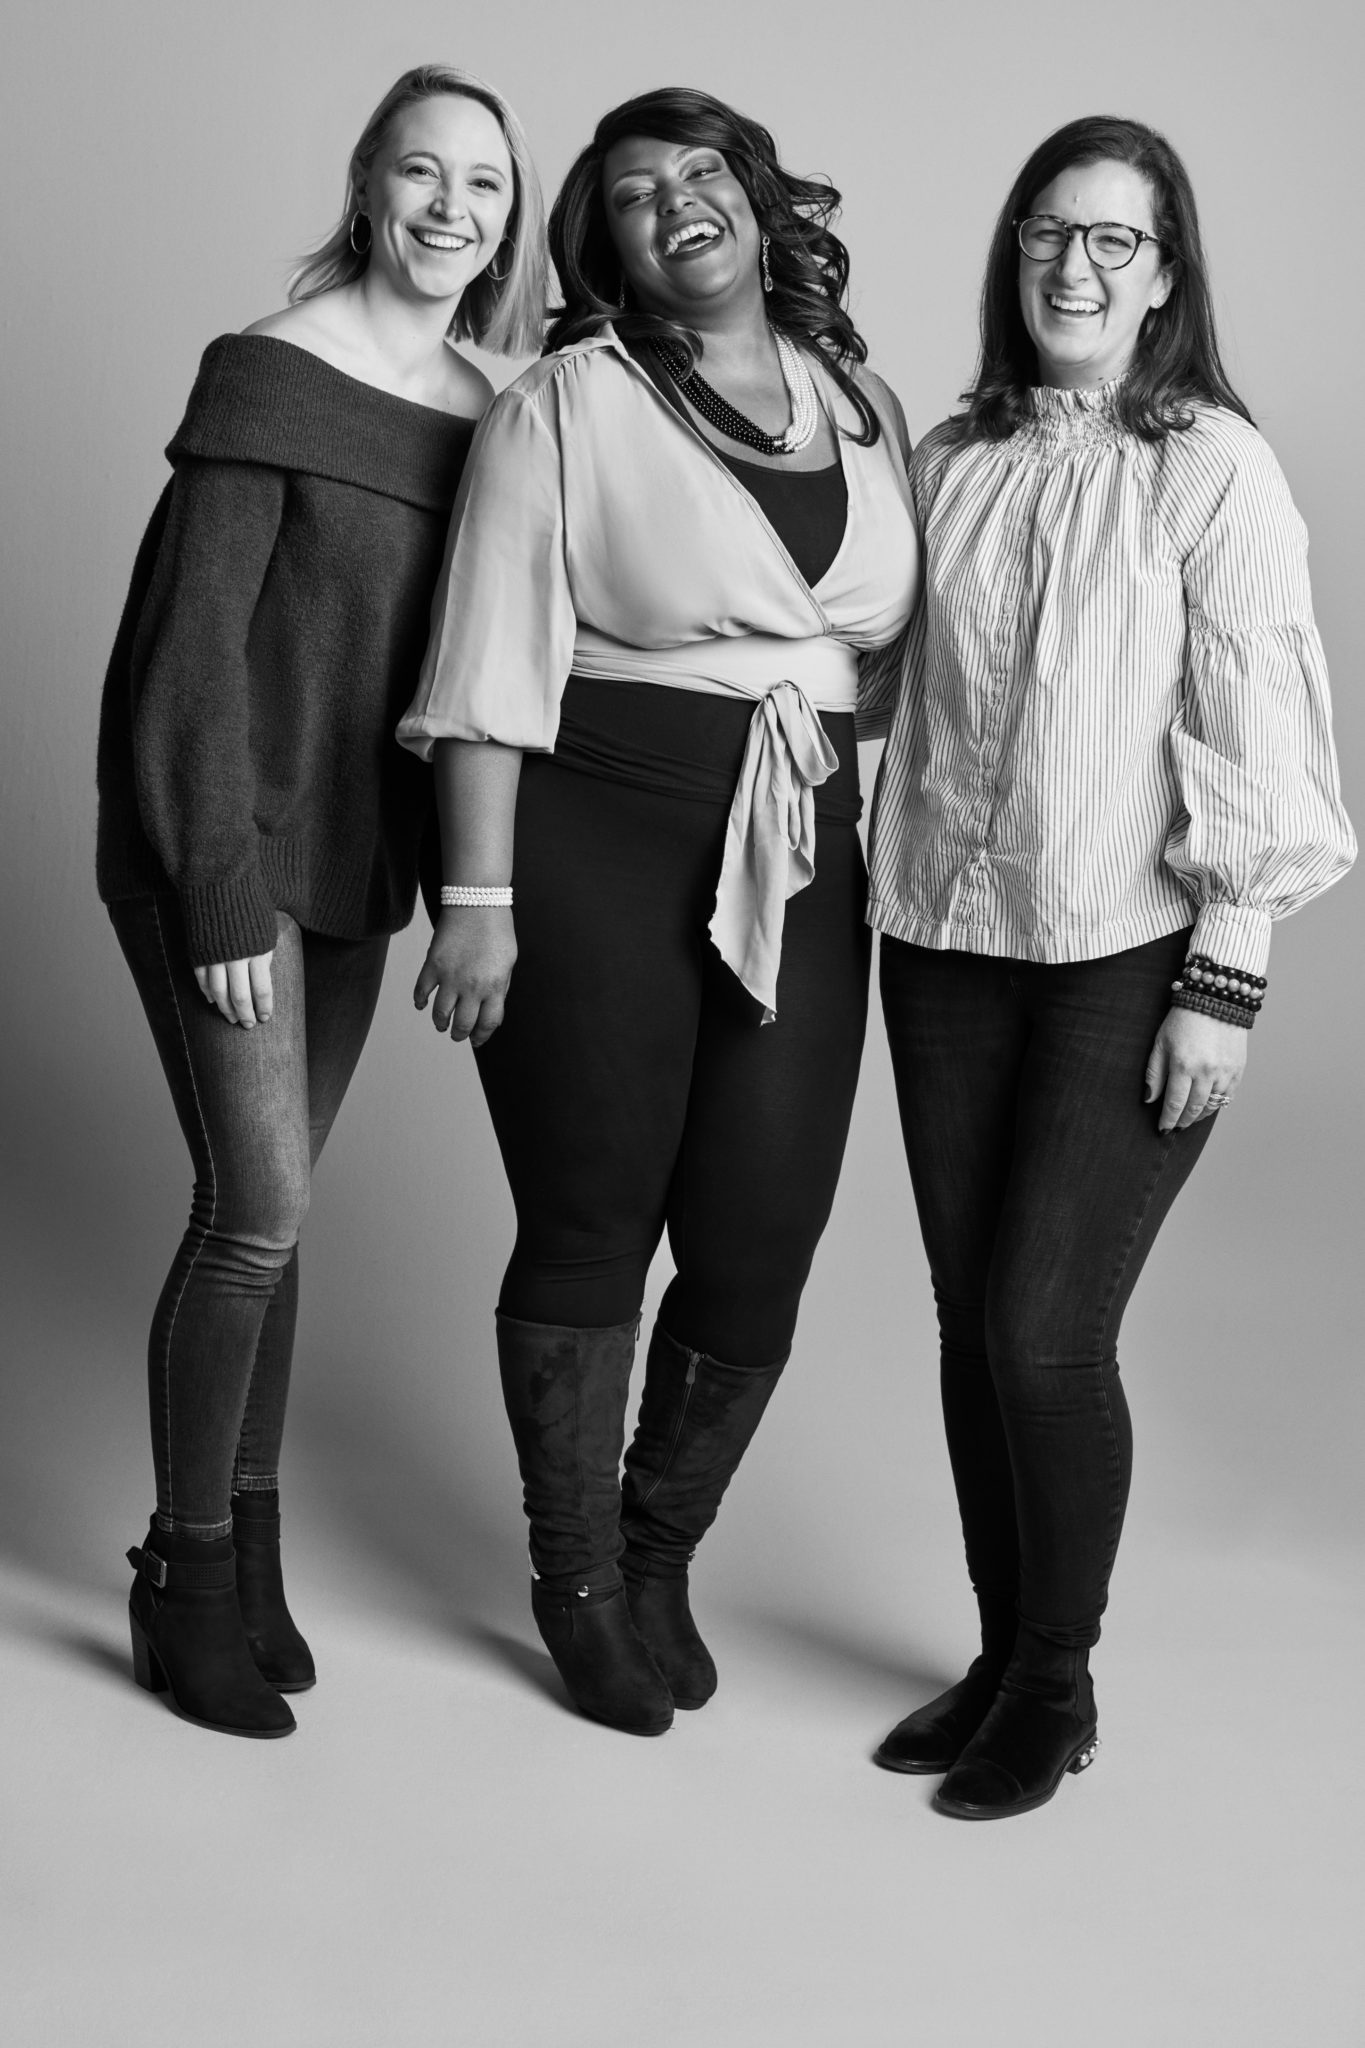 Three women from David's Bridal's Digital team smiling and pictured in a photo studio setting)